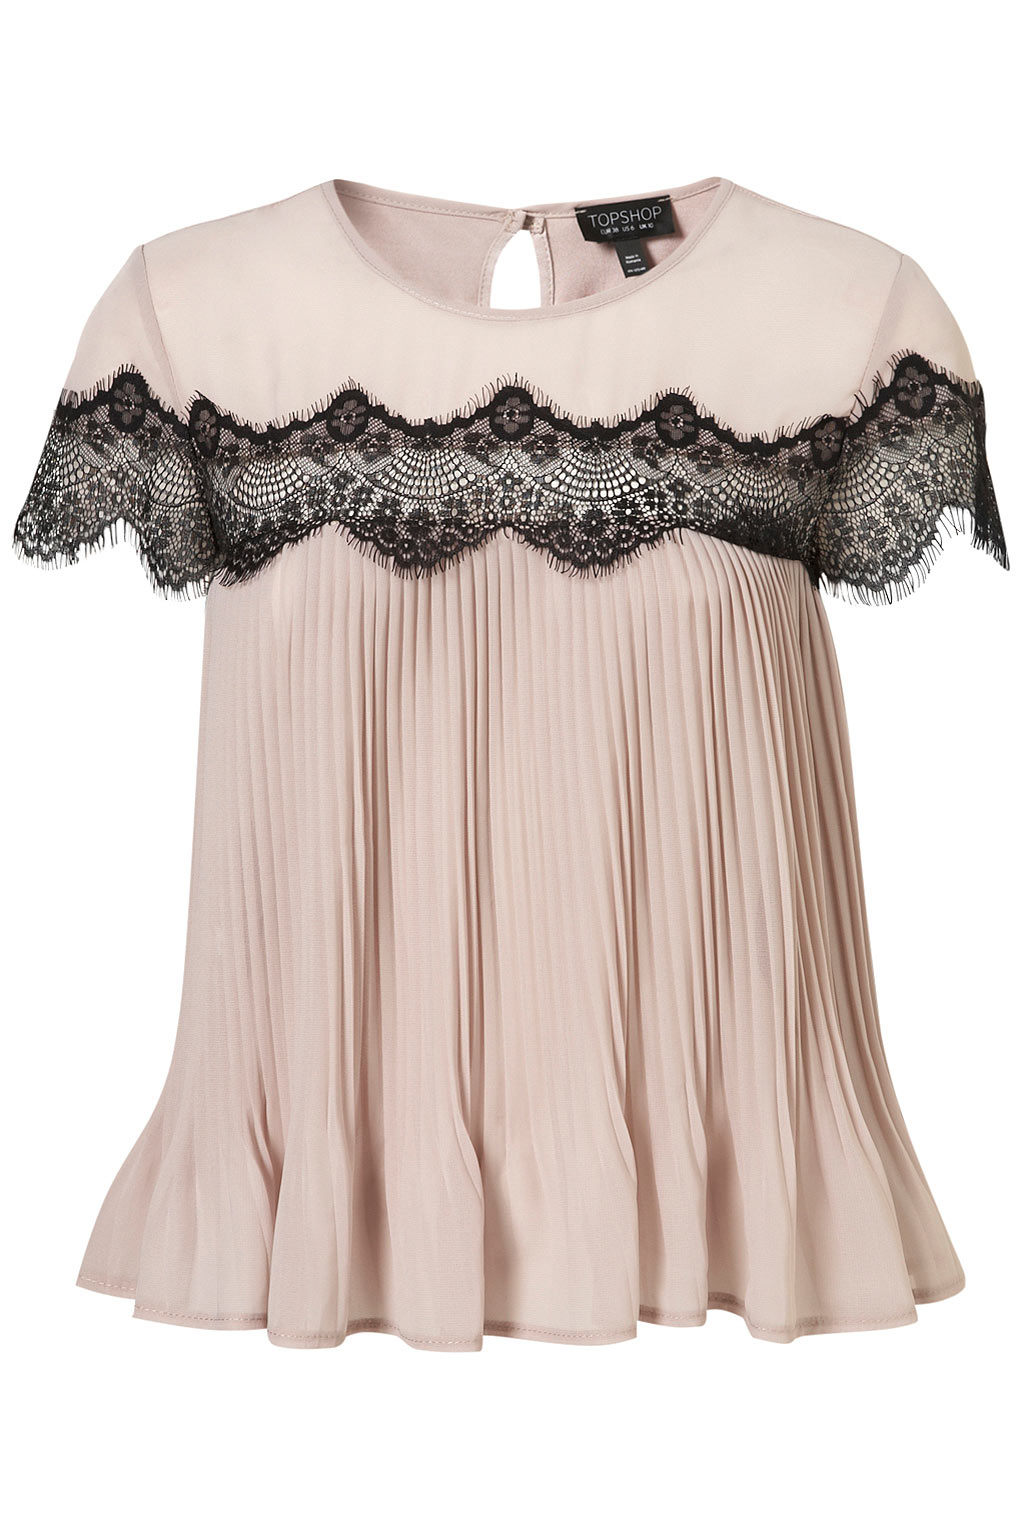 Lyst - Topshop Scallop Lace Insert Pleat Top in Natural